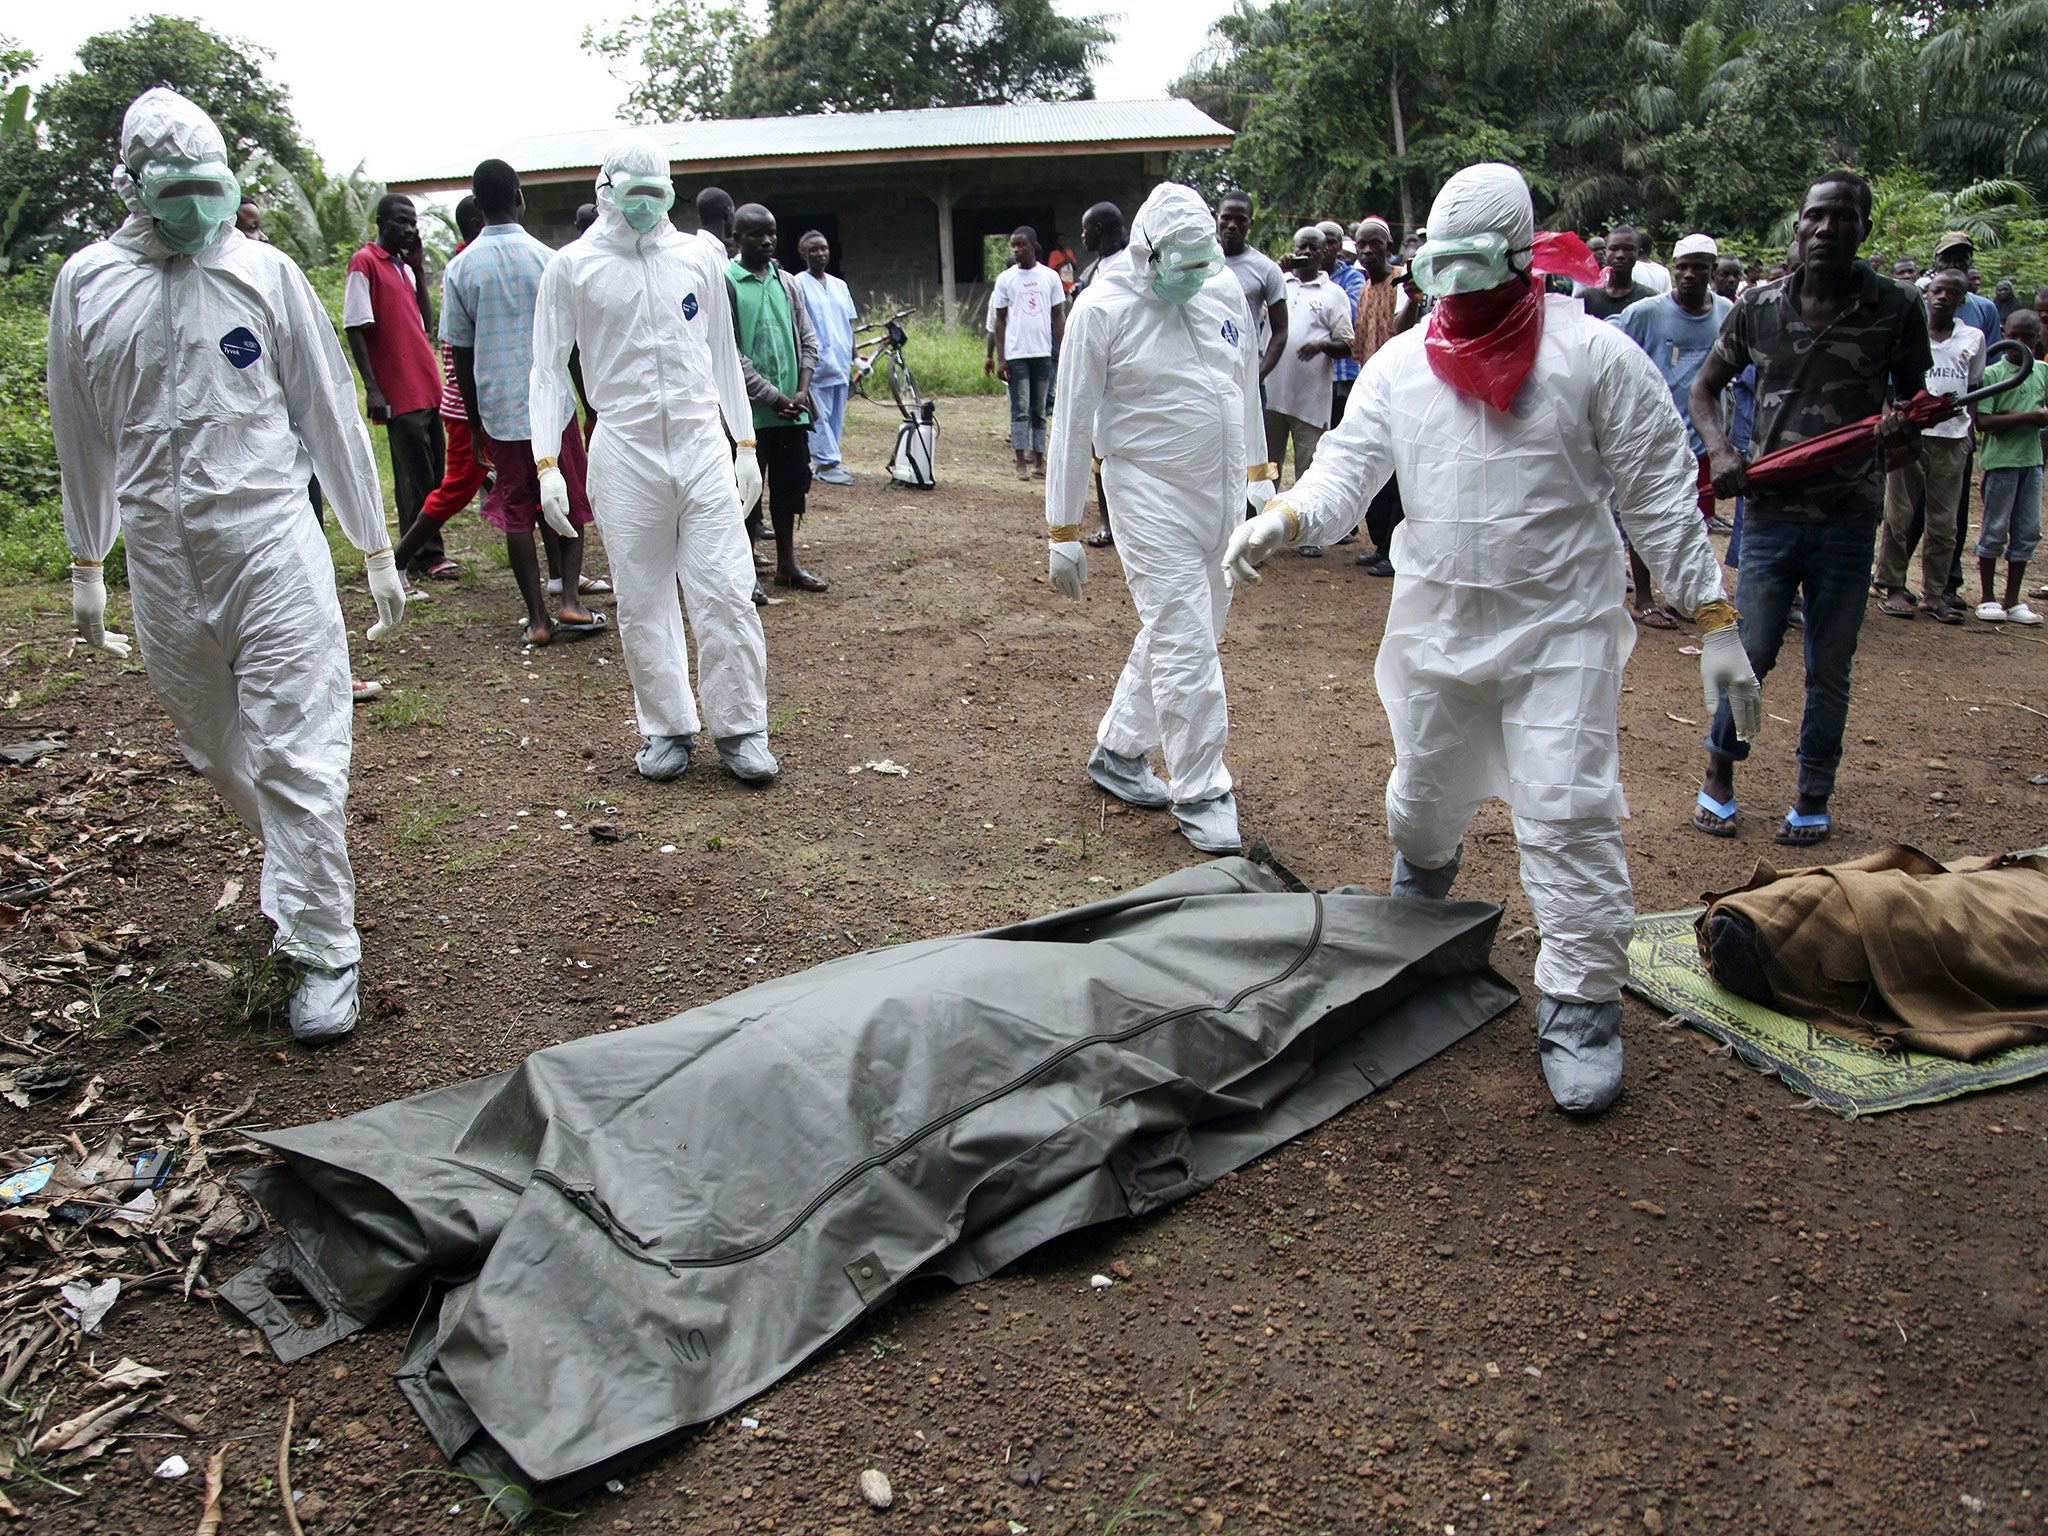 Liberian nurses prepare to bury an Ebola victim yesterday in the Banjor community on the outskirts of Monrovia